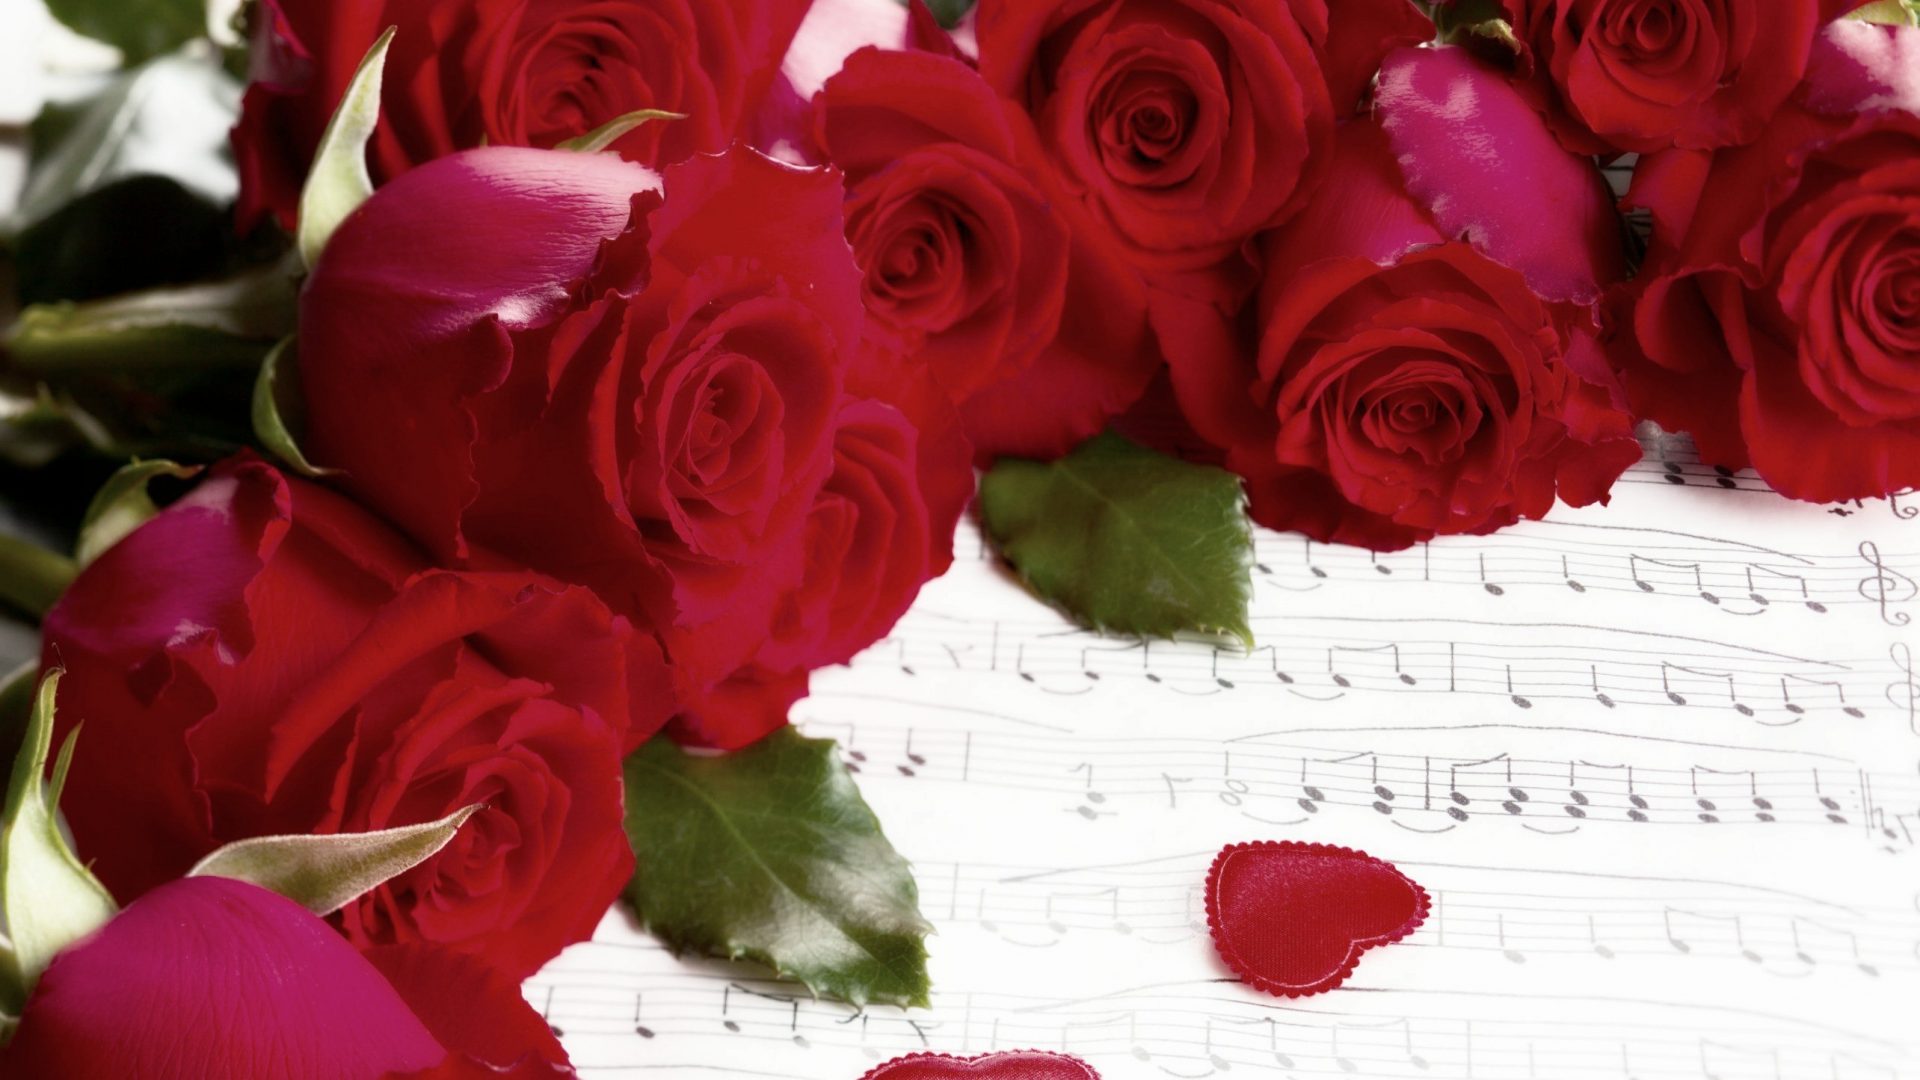 Valentine Hearts Notes Music Heart Holiday Red Roses Garden Roses Hd Wallpaper Backgrounds Download